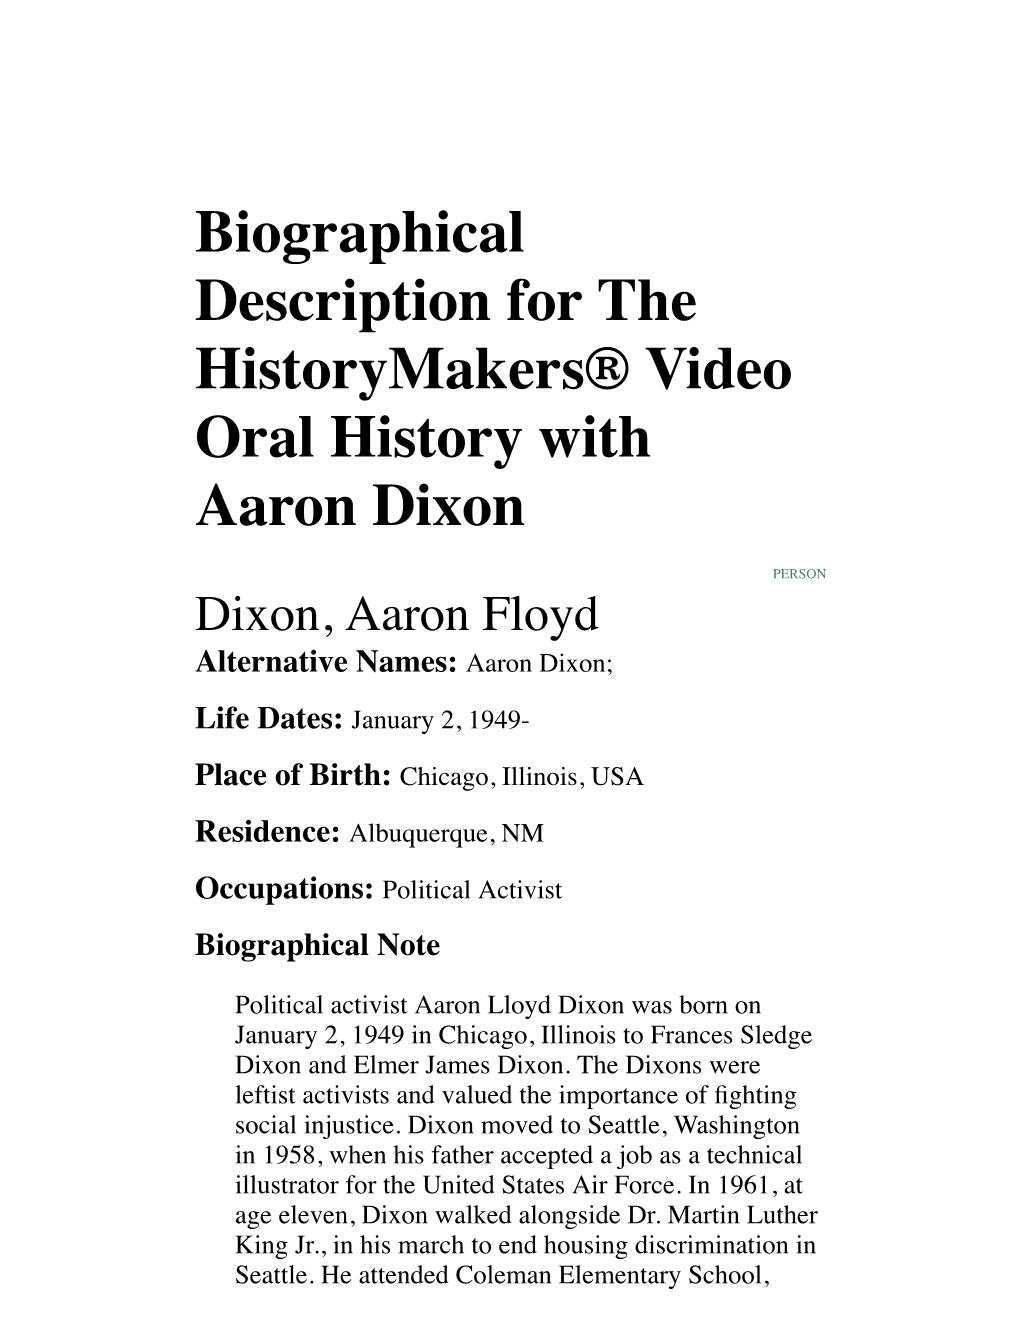 Biographical Description for the Historymakers® Video Oral History with Aaron Dixon